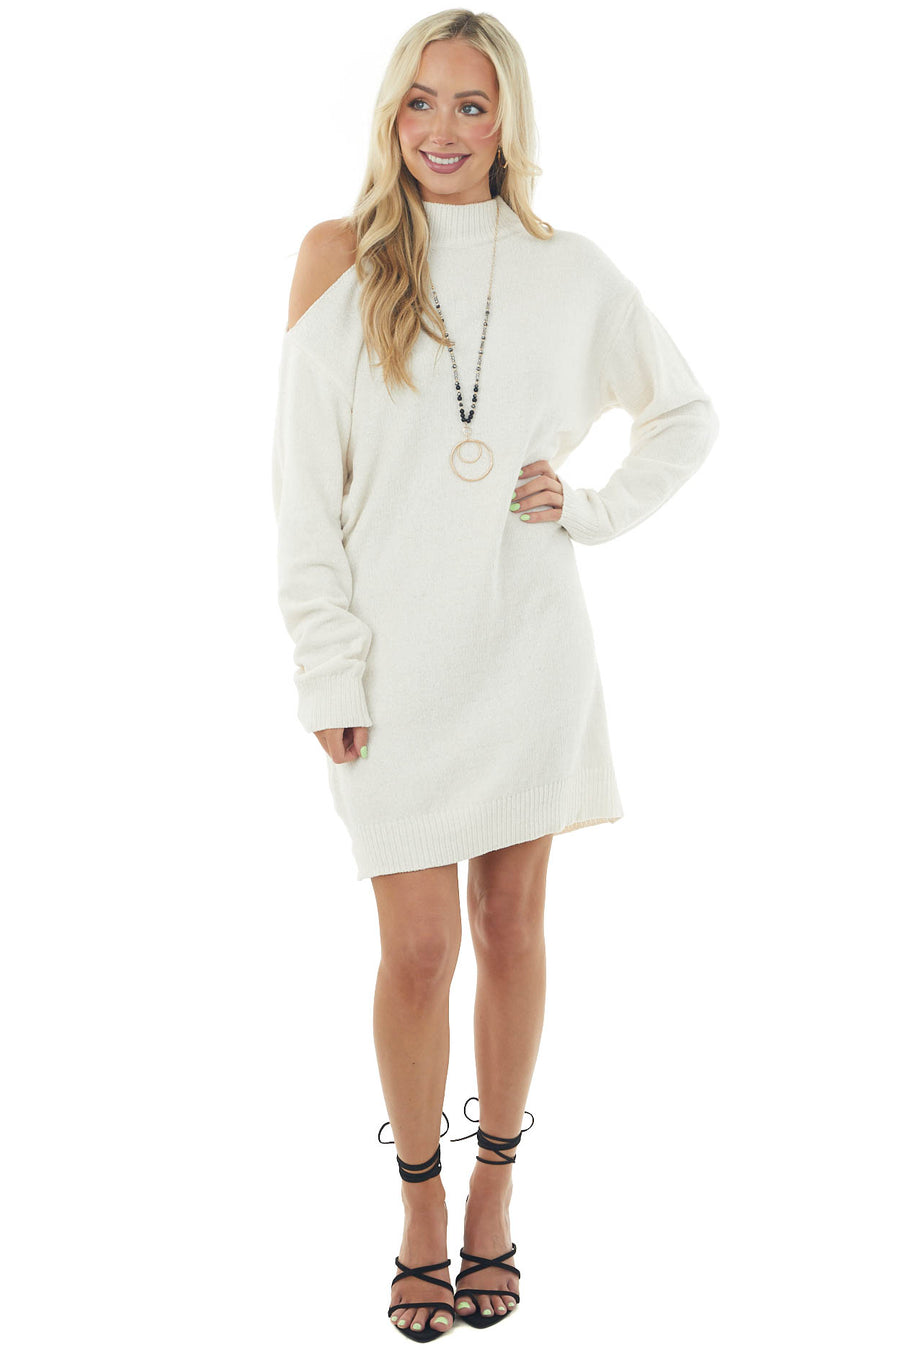 Ivory Chenille Sweater Dress with Single Cold Shoulder